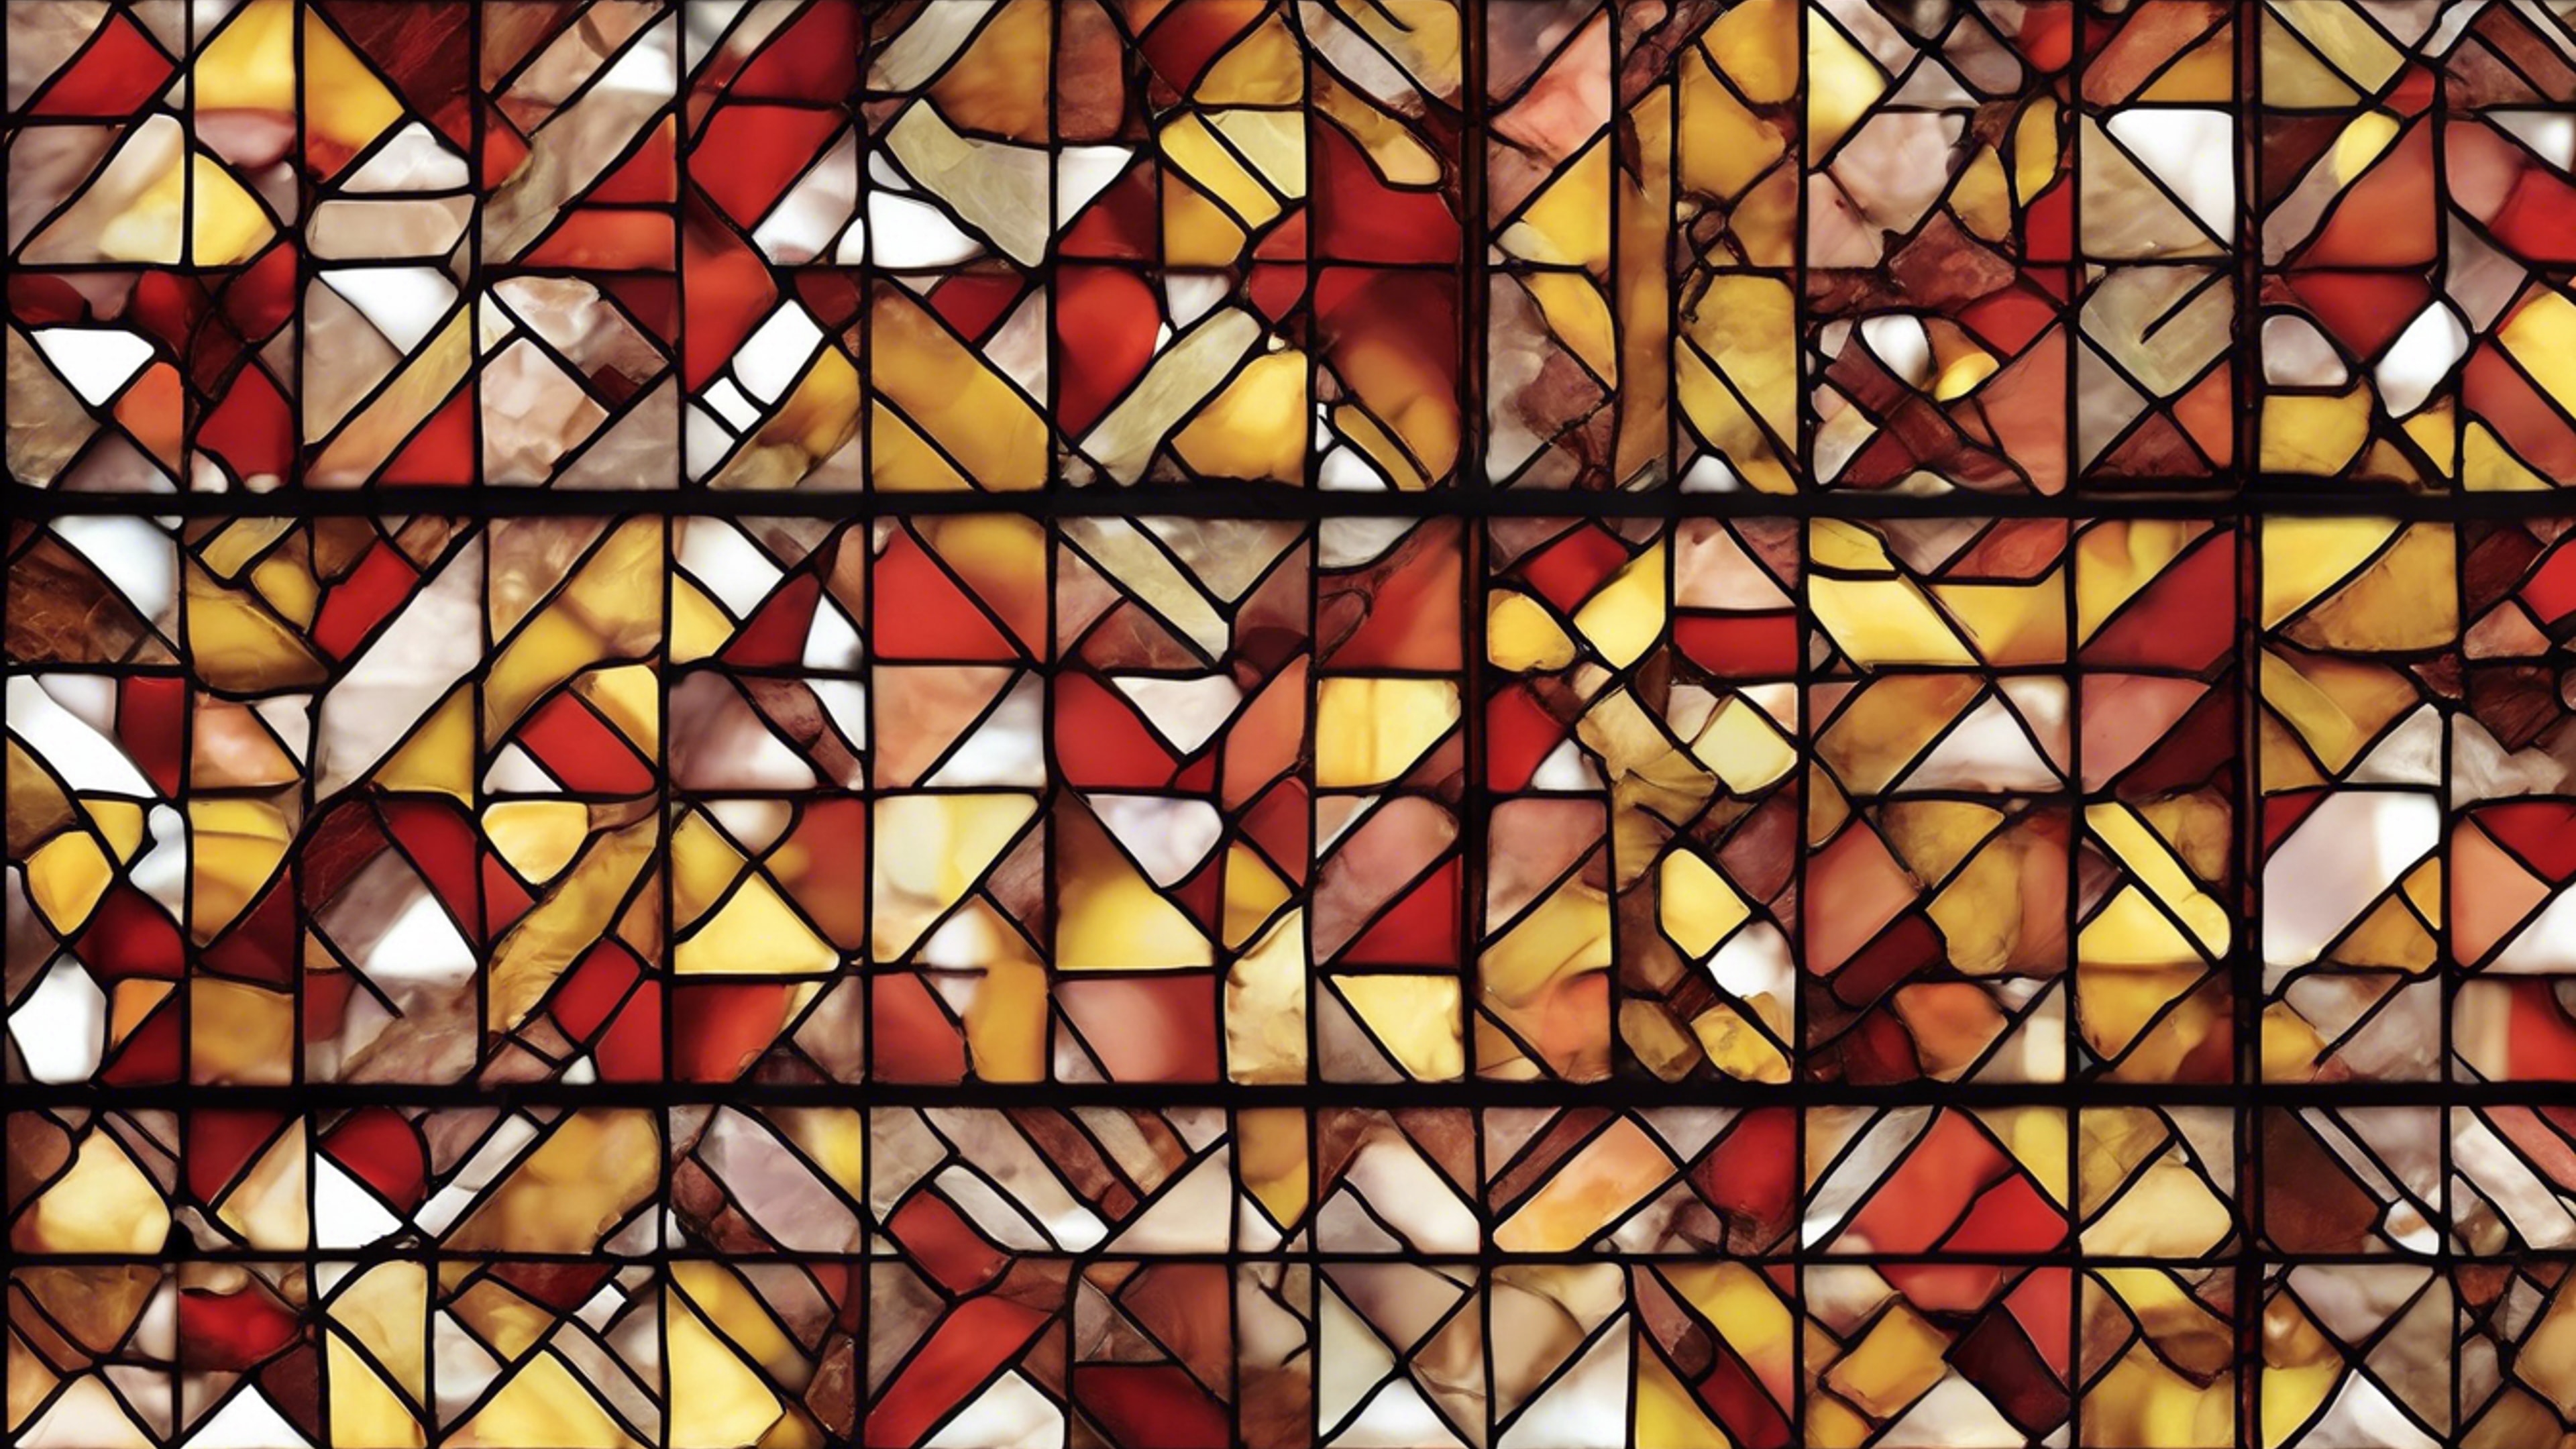 A stained glass design using a repeating motif of red and yellow bricks. Тапет[d98aa8b1ebac46789cc9]